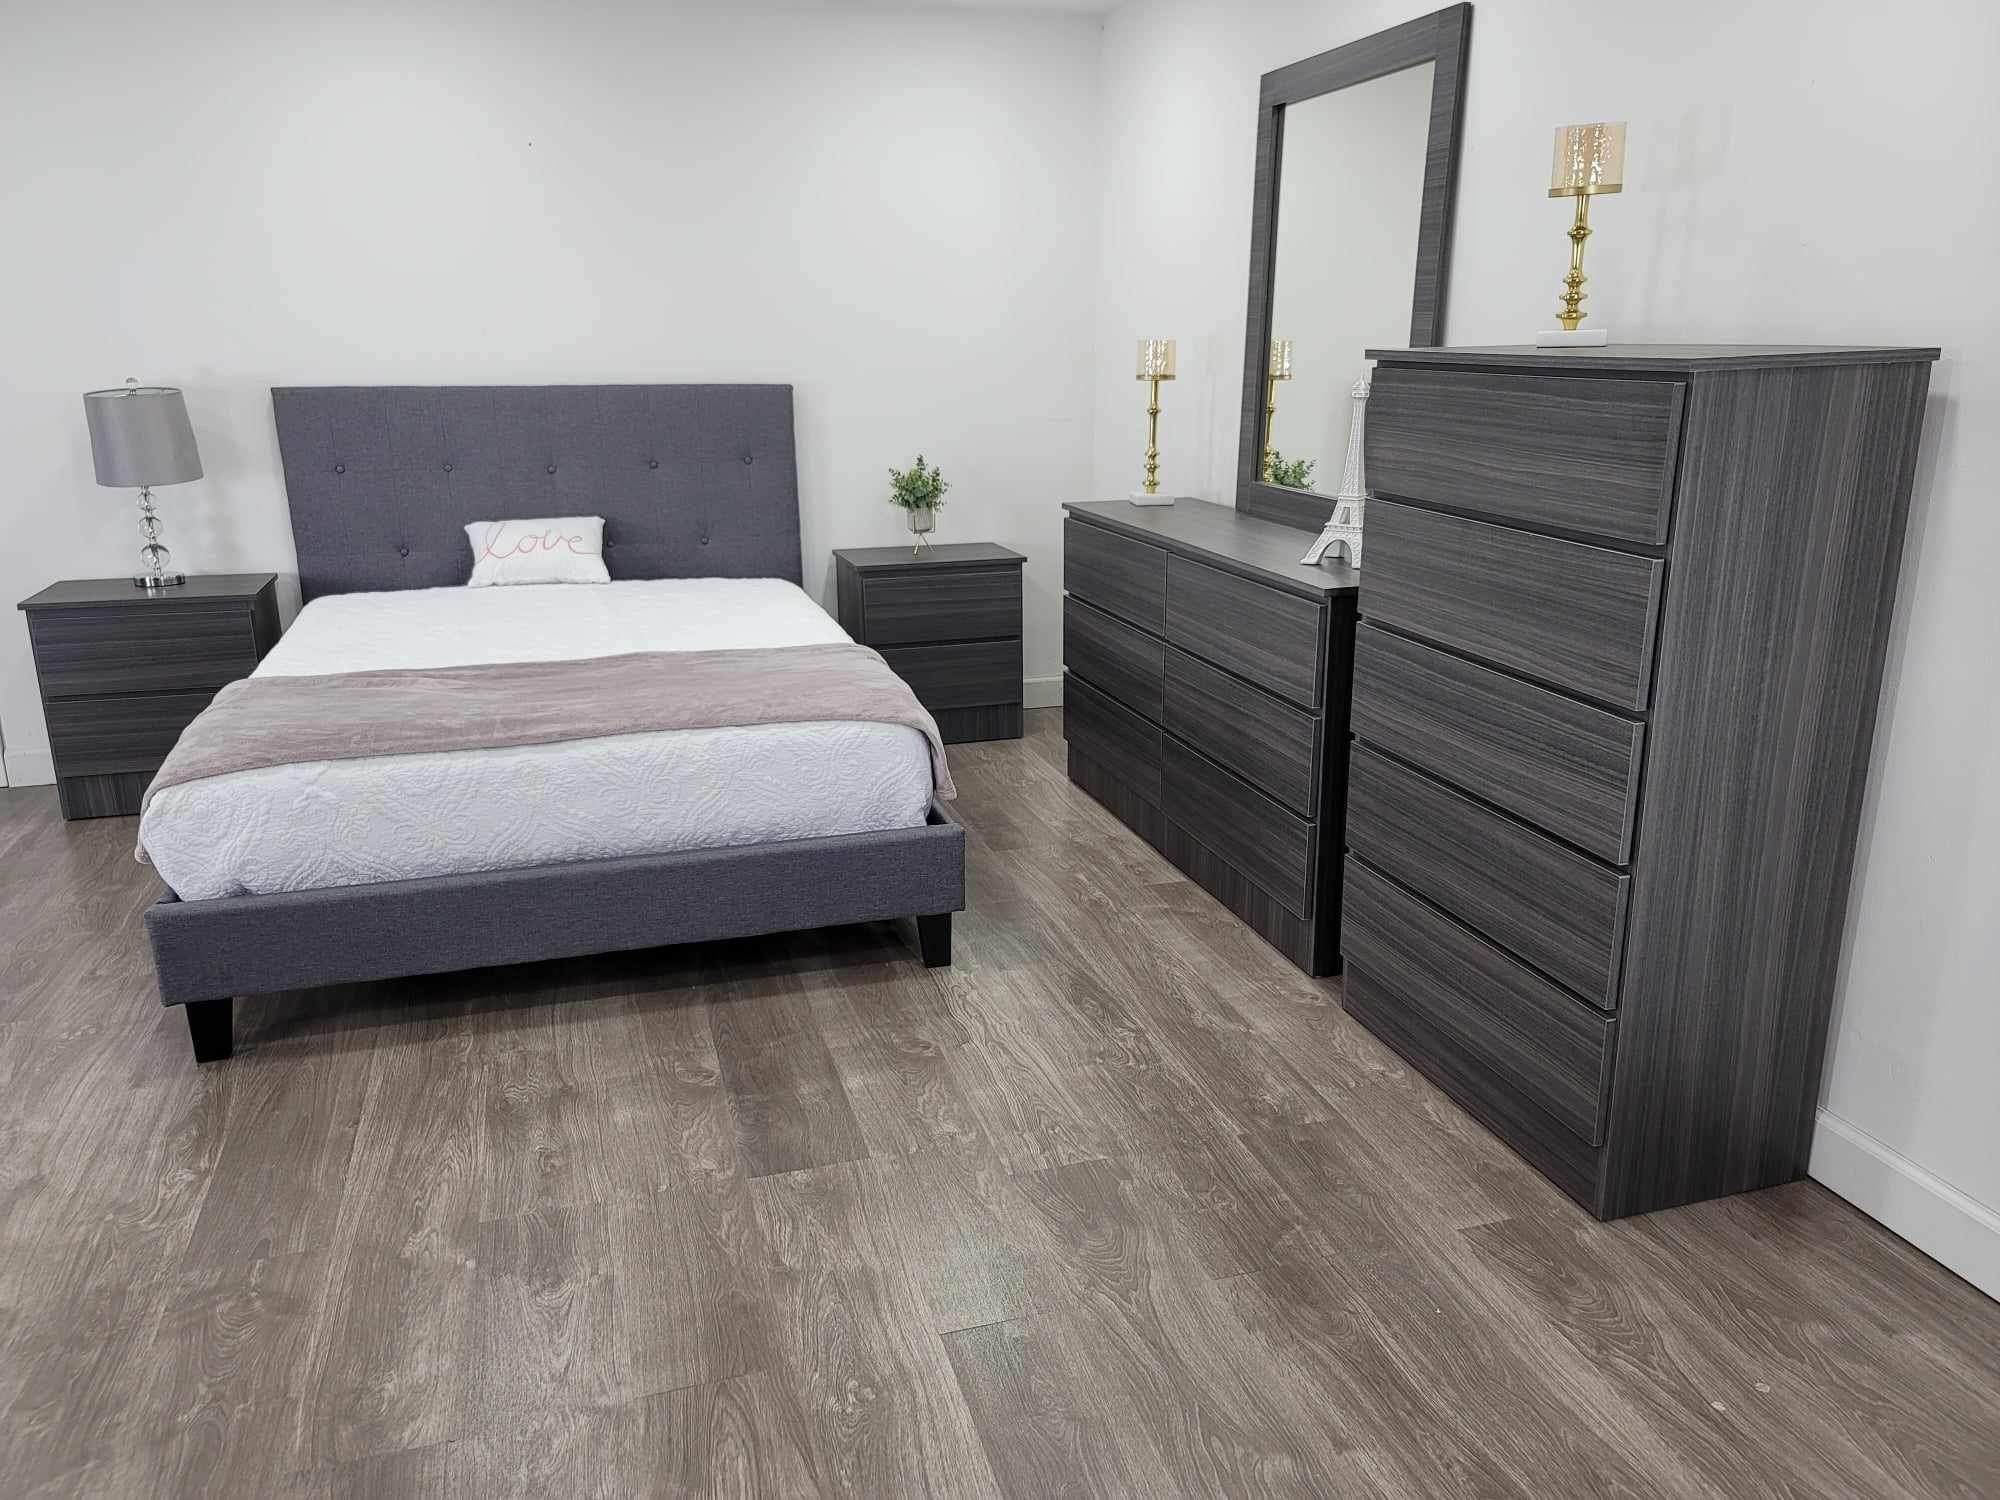 BRAND New Bedroom Set - ALL SIZES Available - Same Day Delivery 🚚 